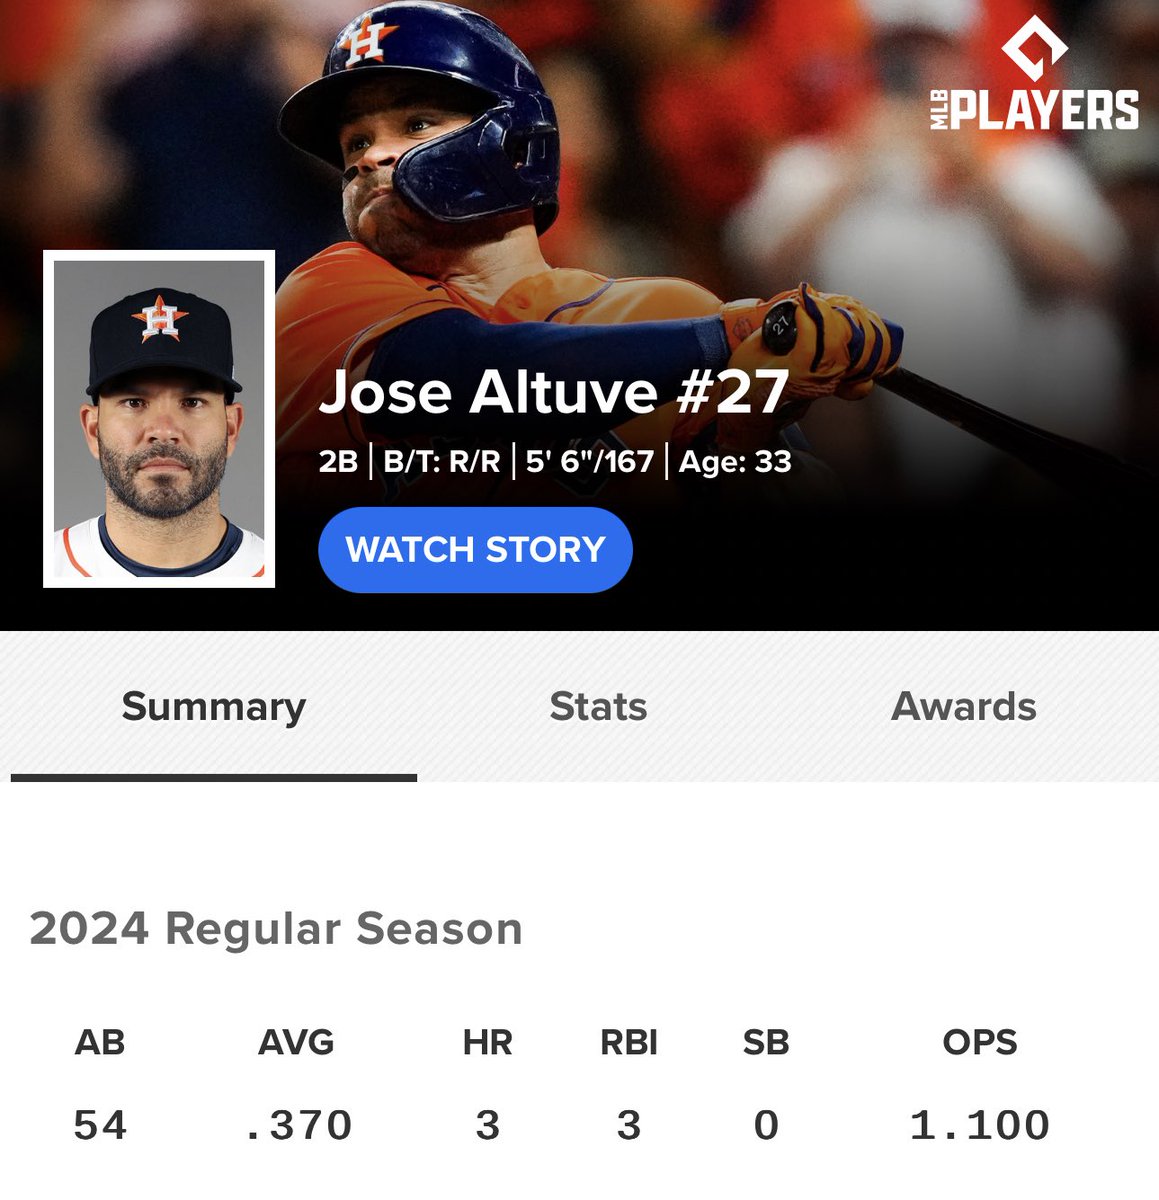 How great is Jose Altuve though?